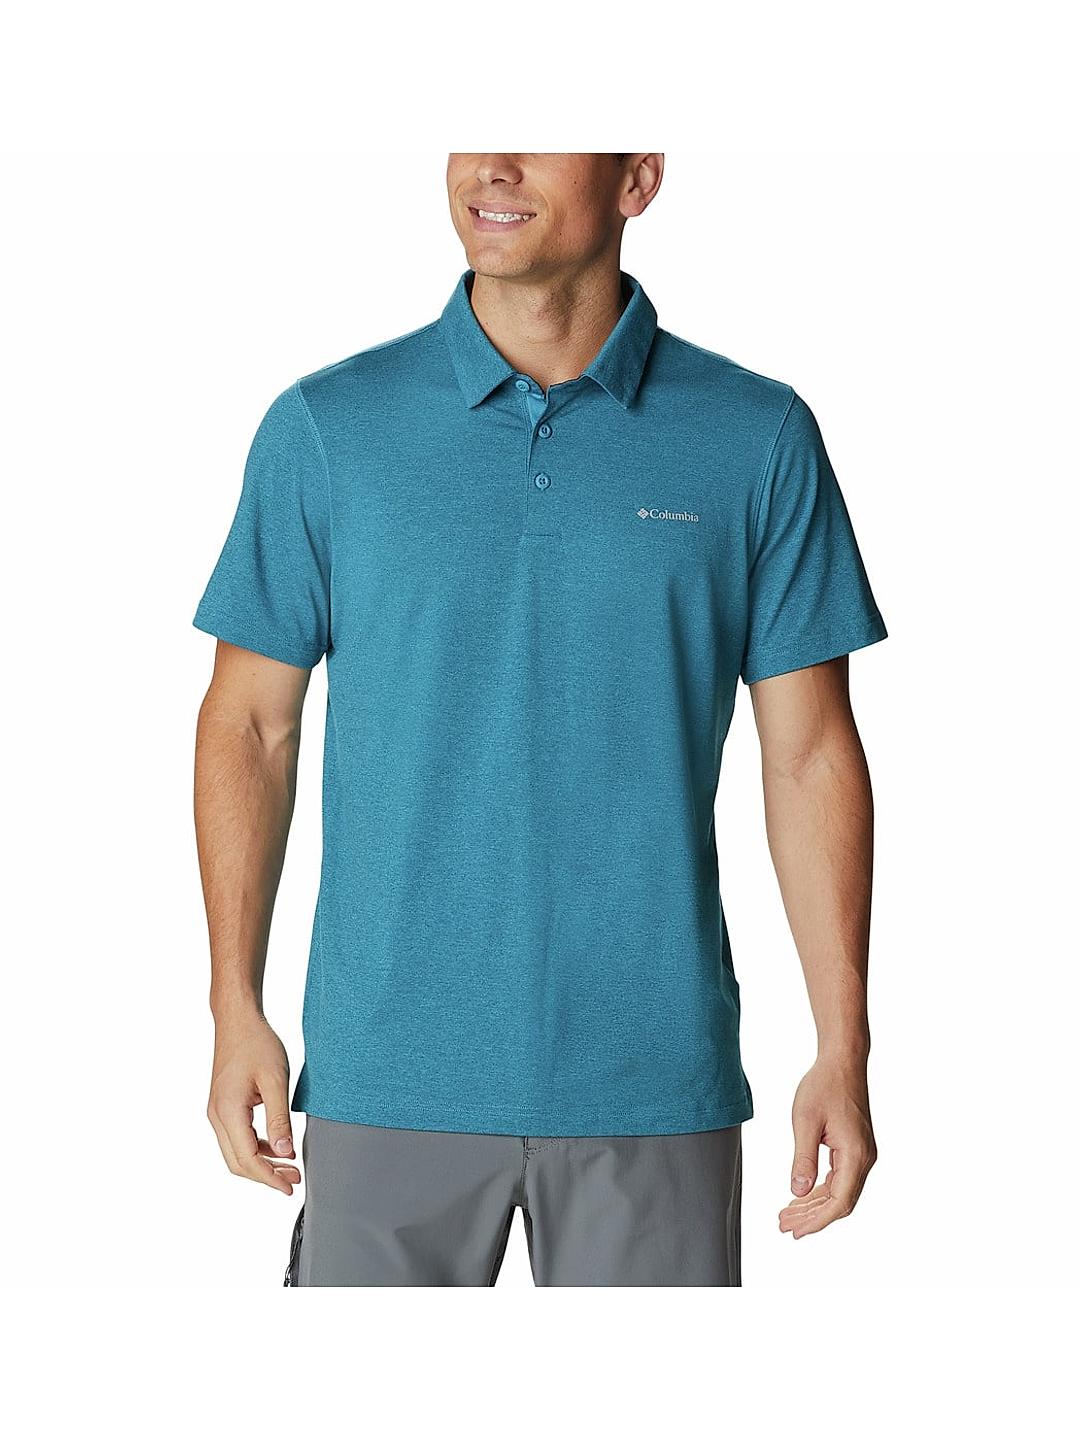 Buy Blue Tech Trail Polo for Men Online at Columbia Sportswear | 480910